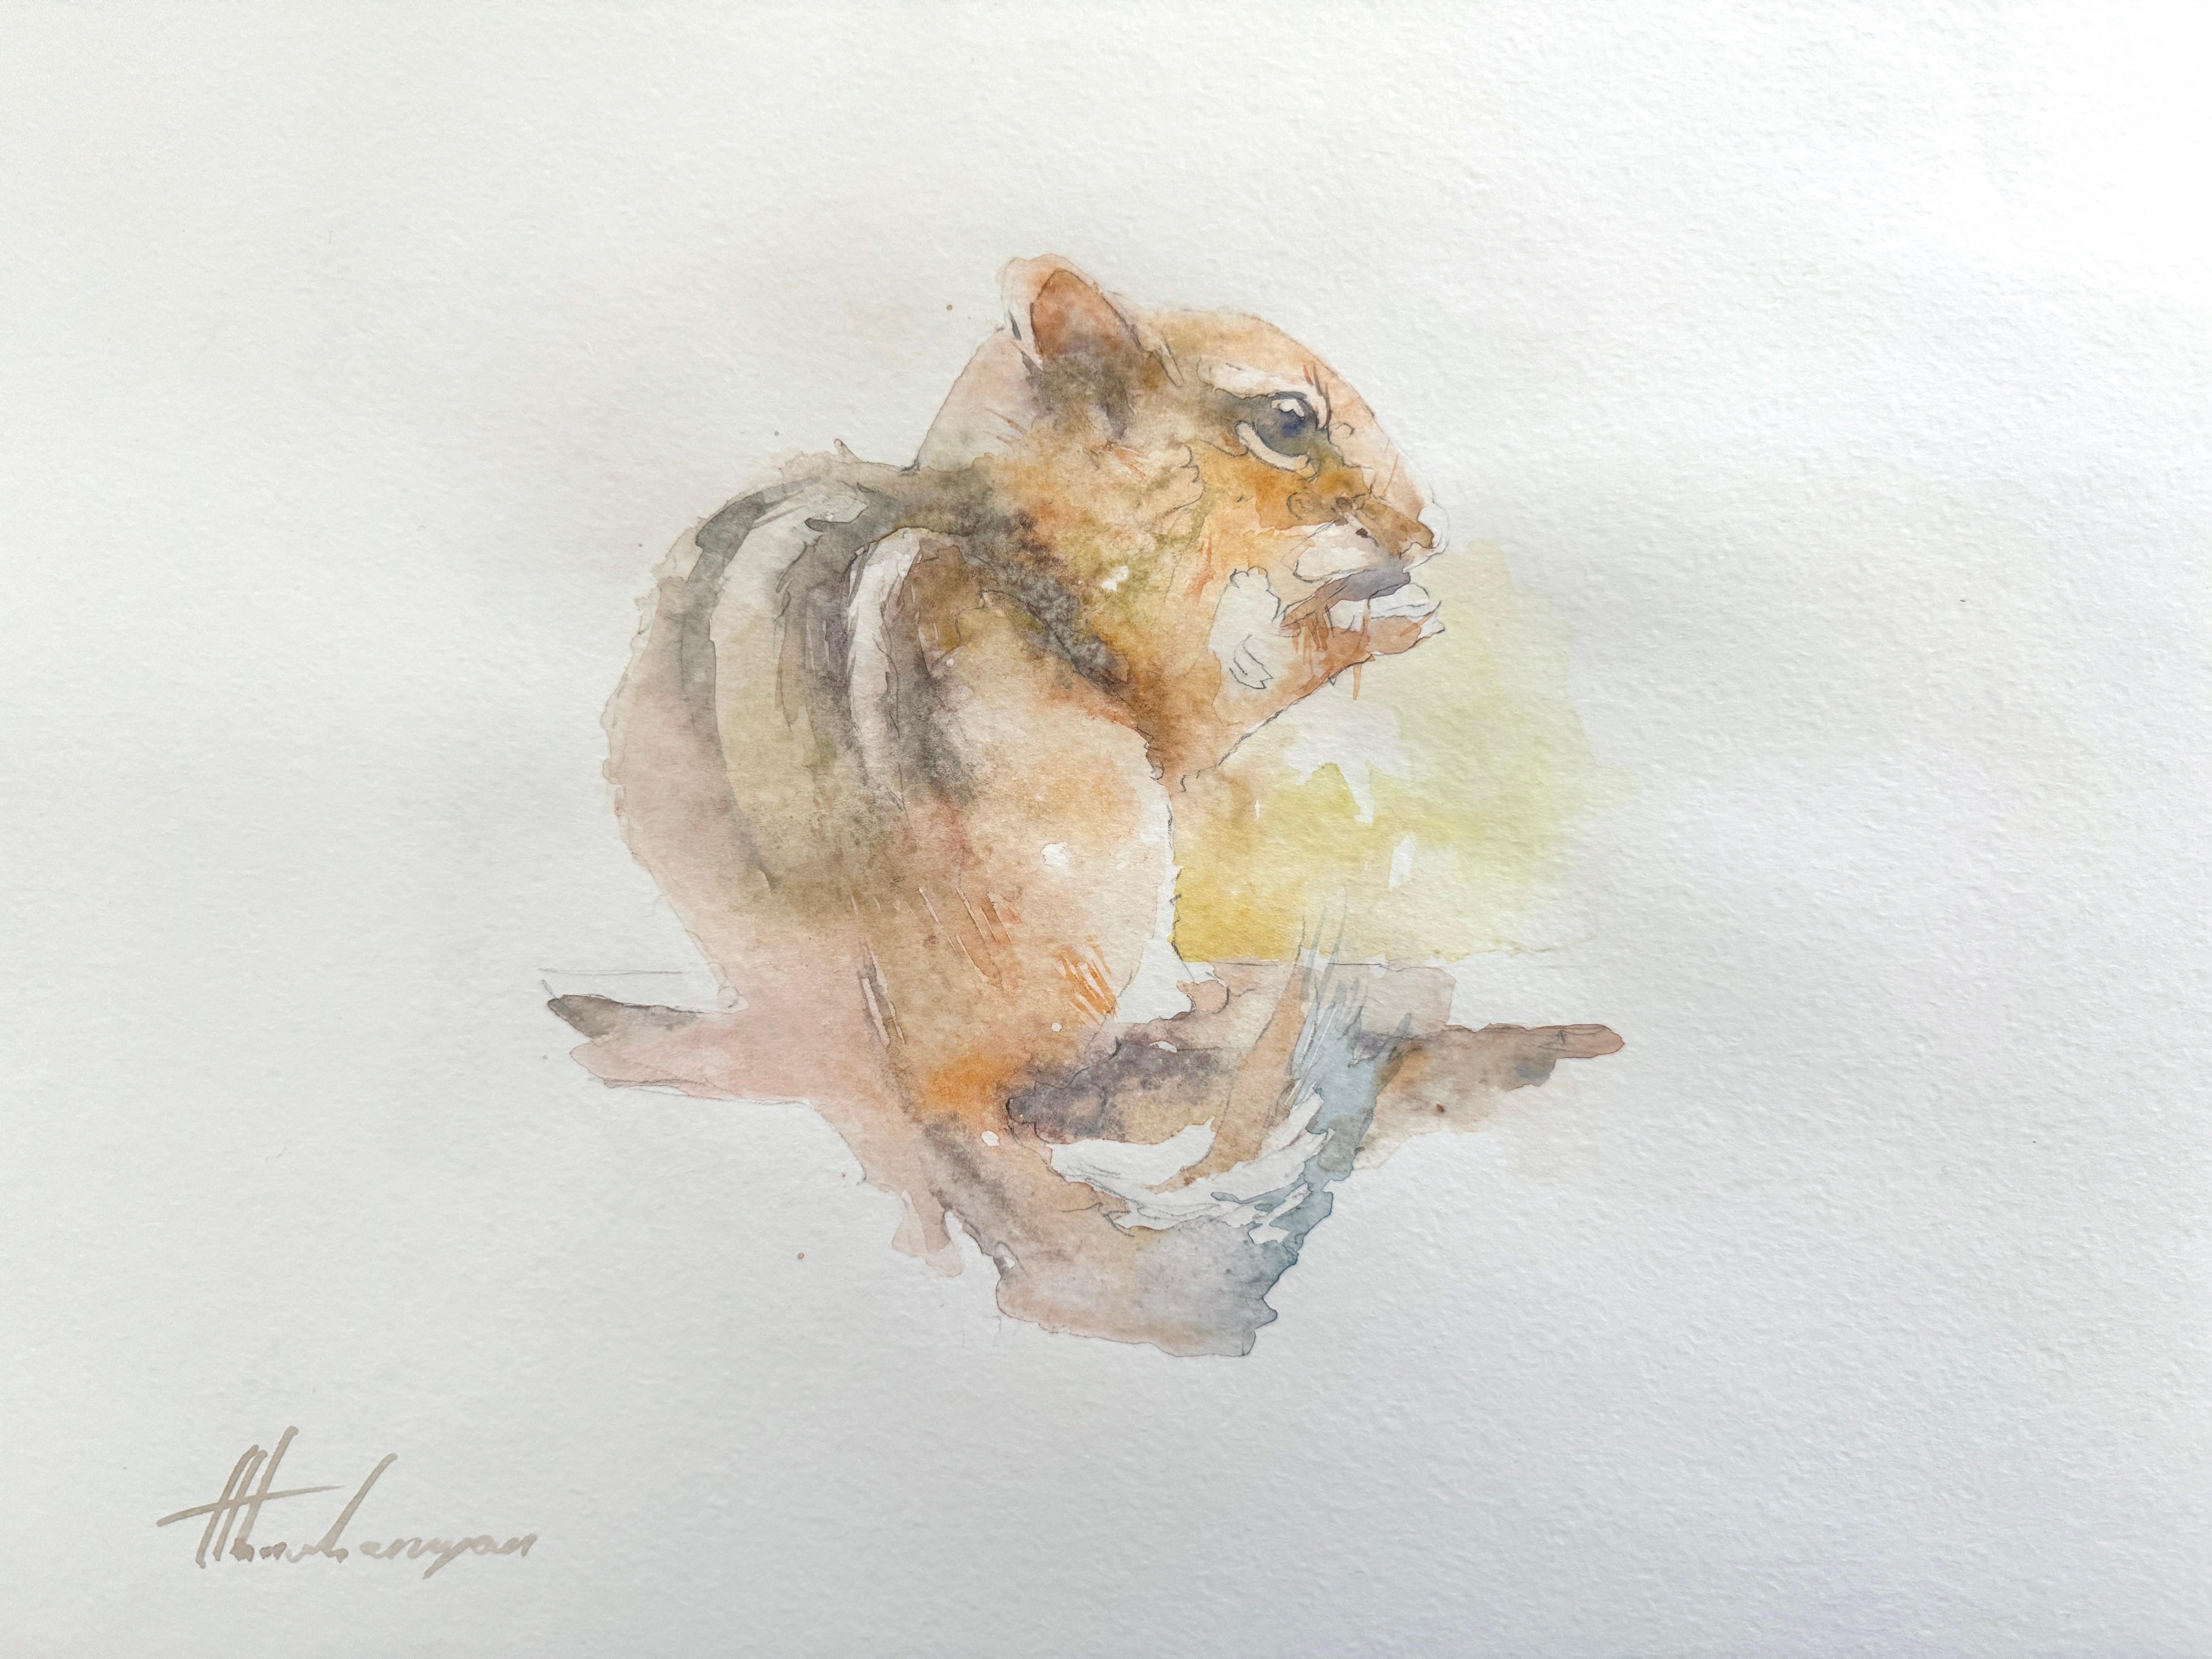 Chipmunk, Animal, Watercolor Handmade Painting, One of a Kind